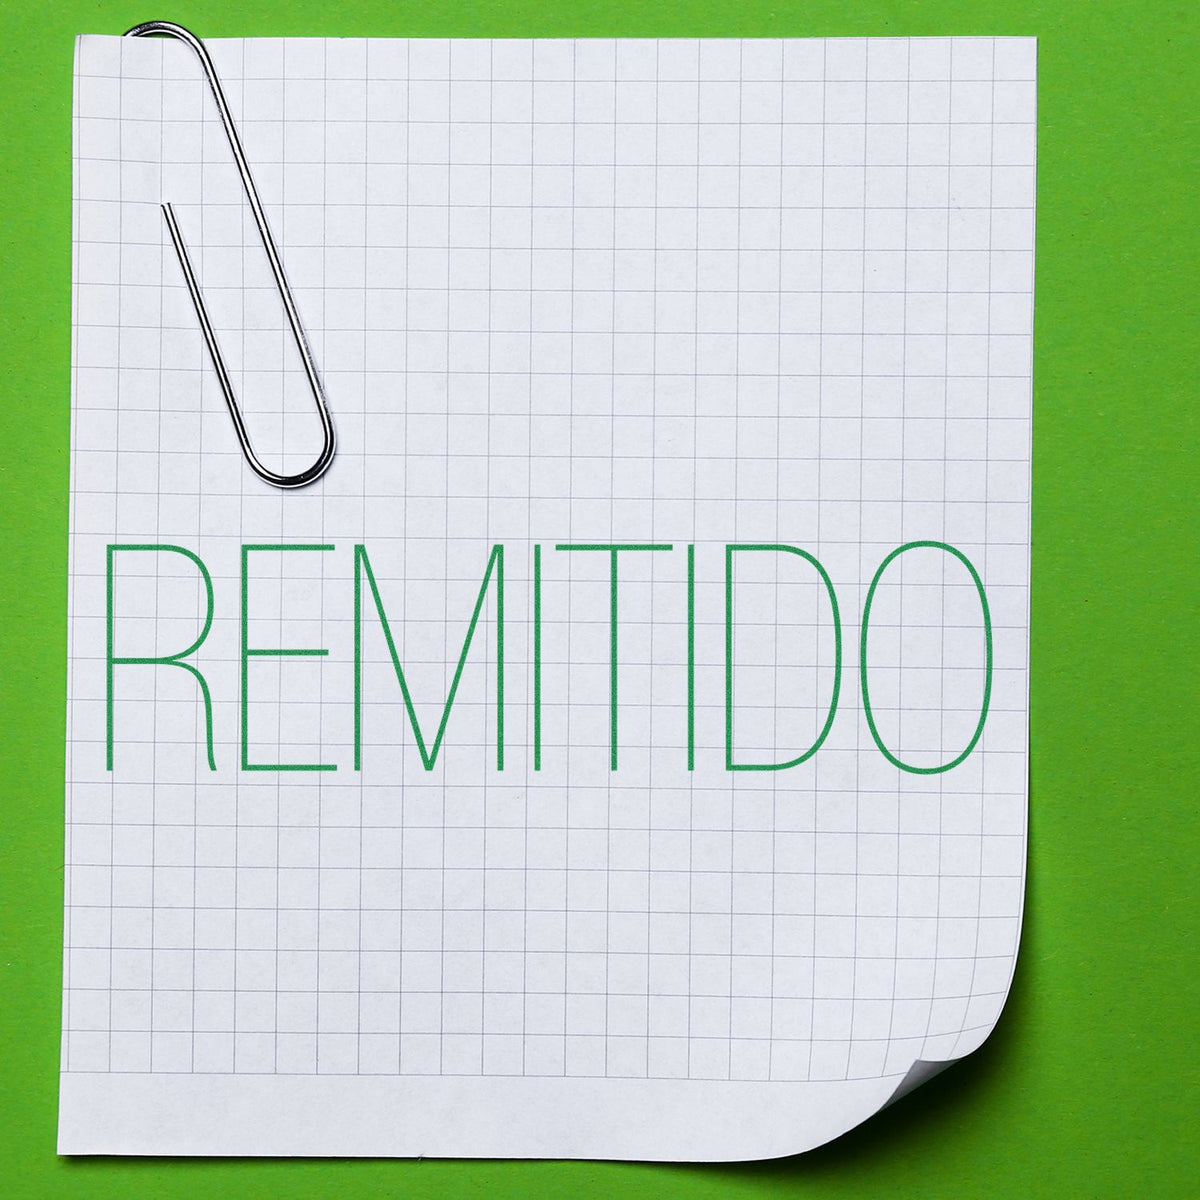 Large Remitido Rubber Stamp In Use